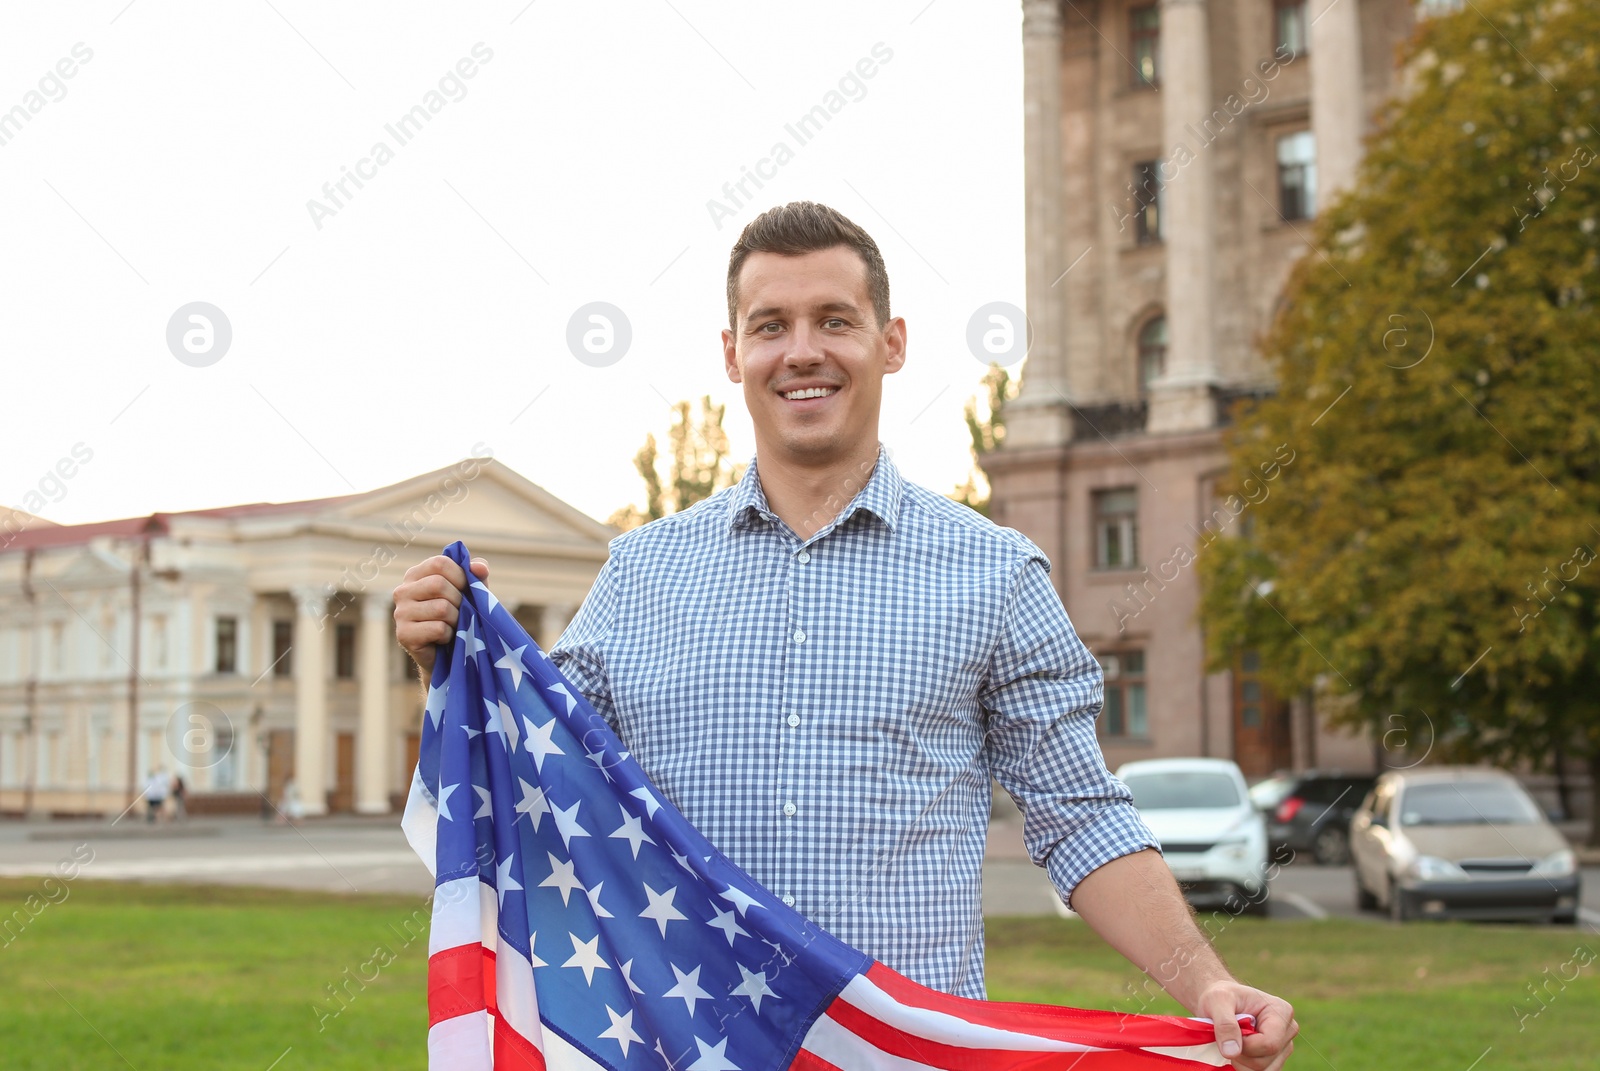 Photo of Man with American flag on city street